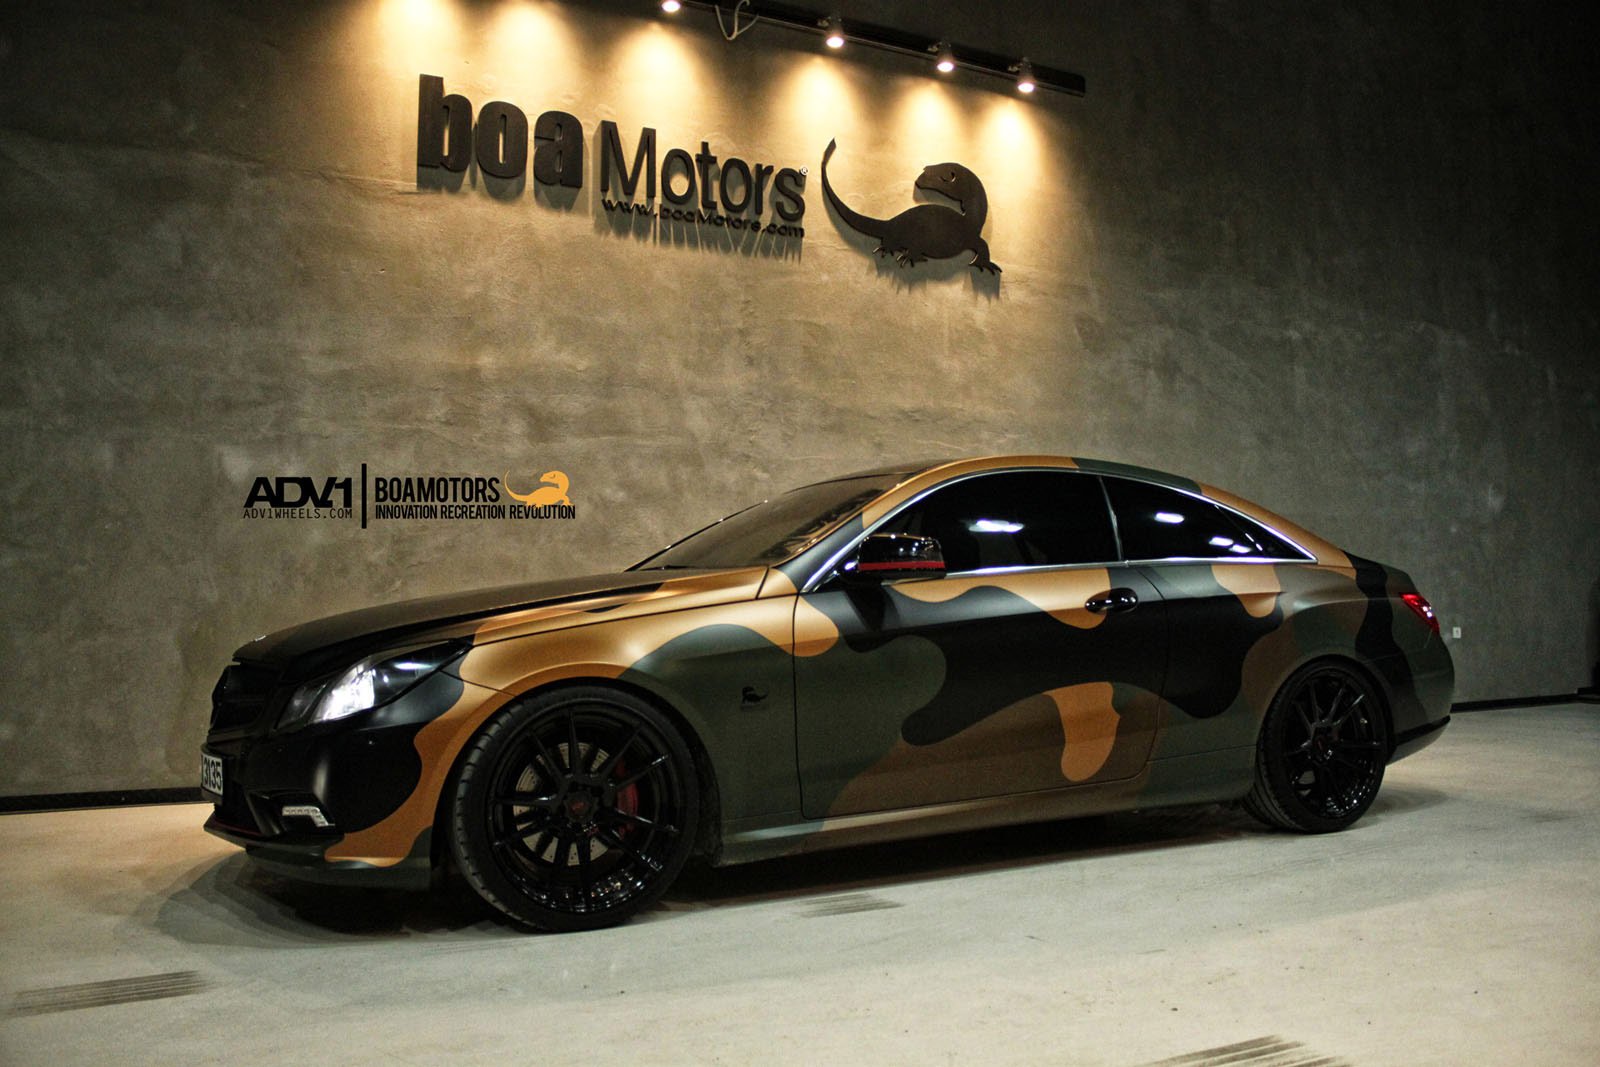 adv1, Wheels, Mercedes, E class, Coupe, Wrapping, Tuning, Car Wallpaper